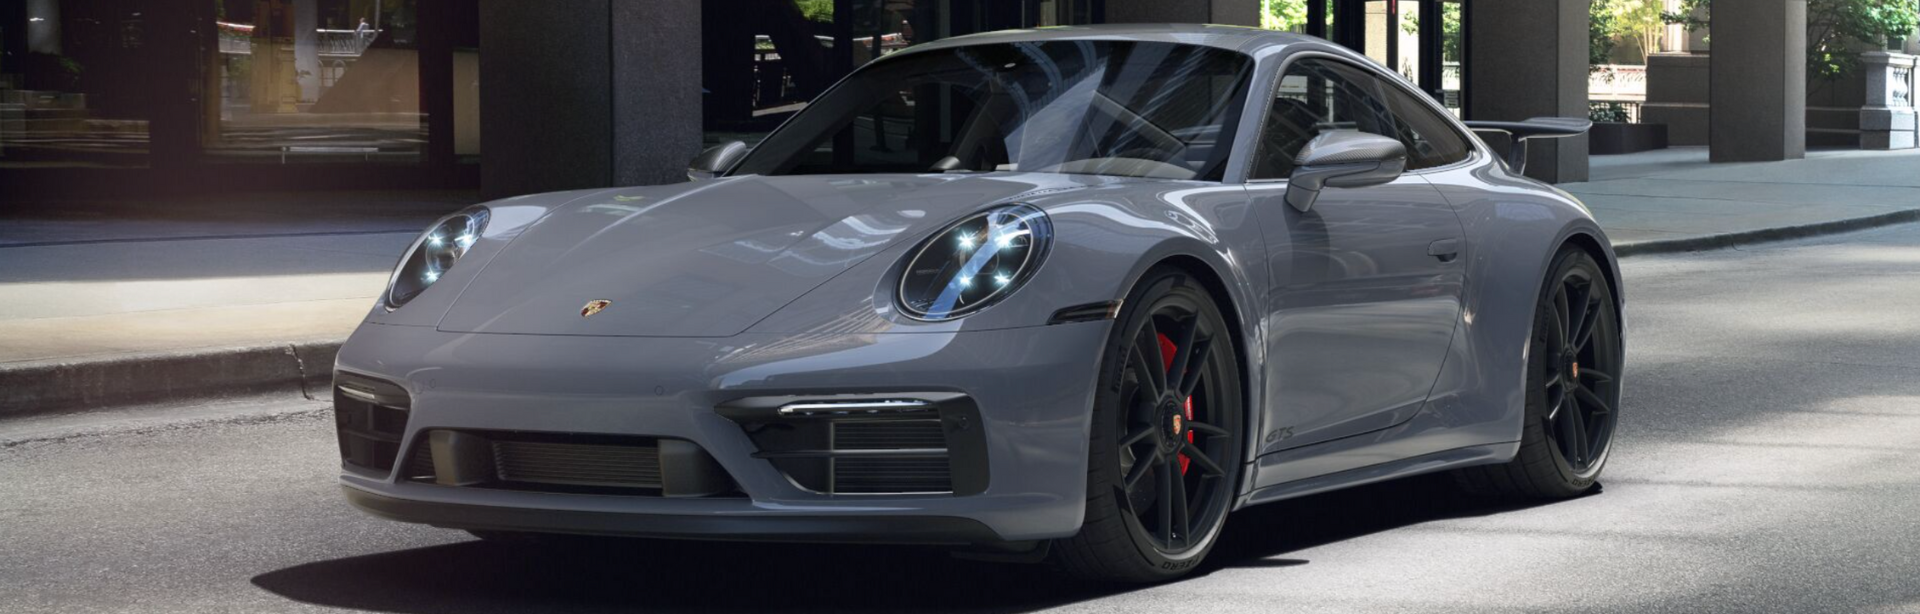 See the New Porsche 911 Carrera in Madison, WI | Features Review